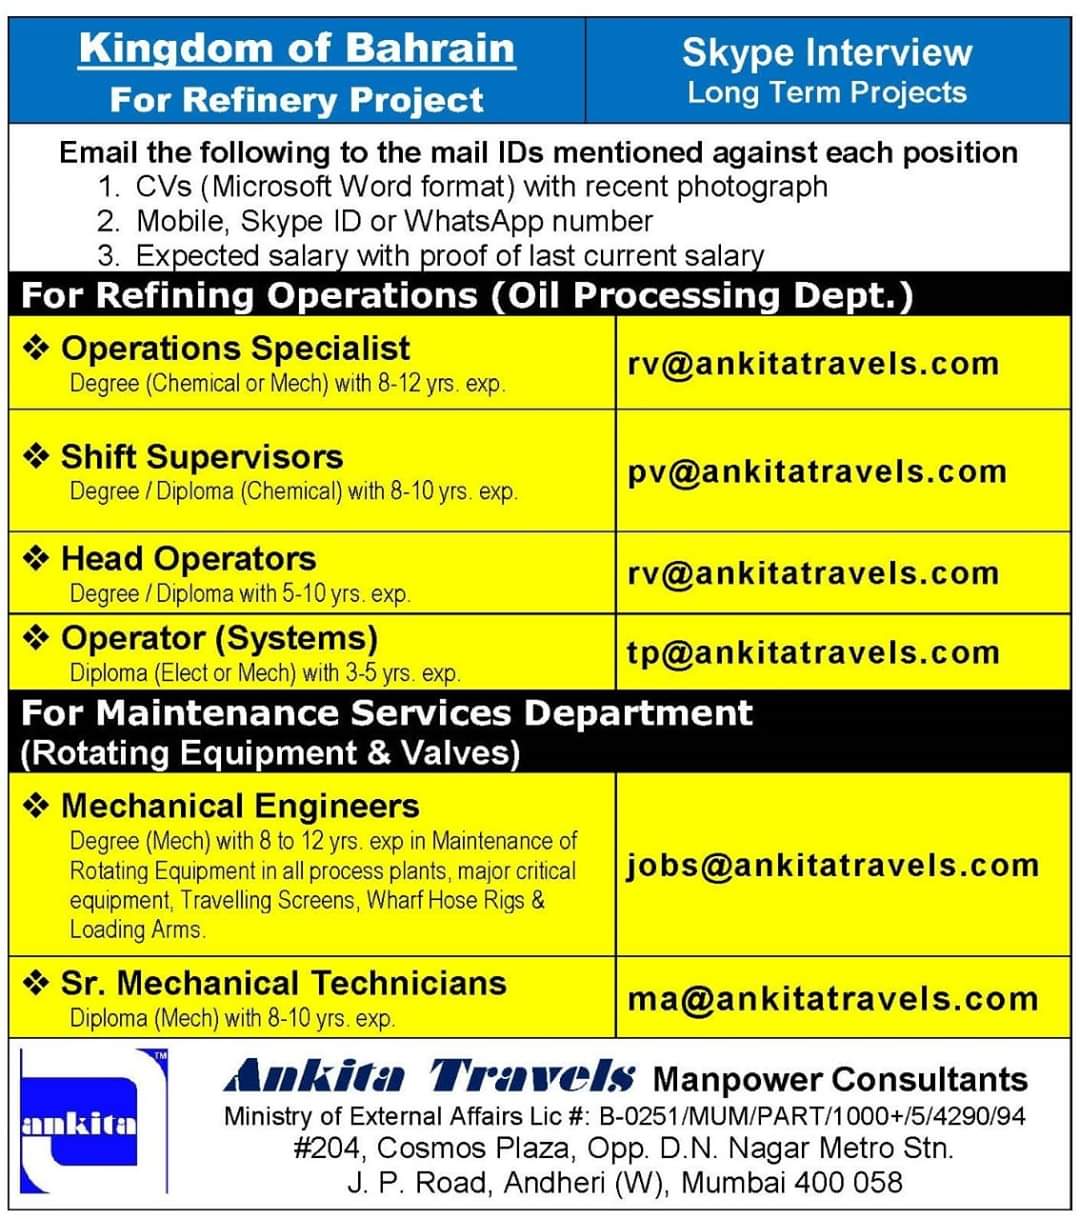 REQUIREMENT FOR REFINERY PROJECT